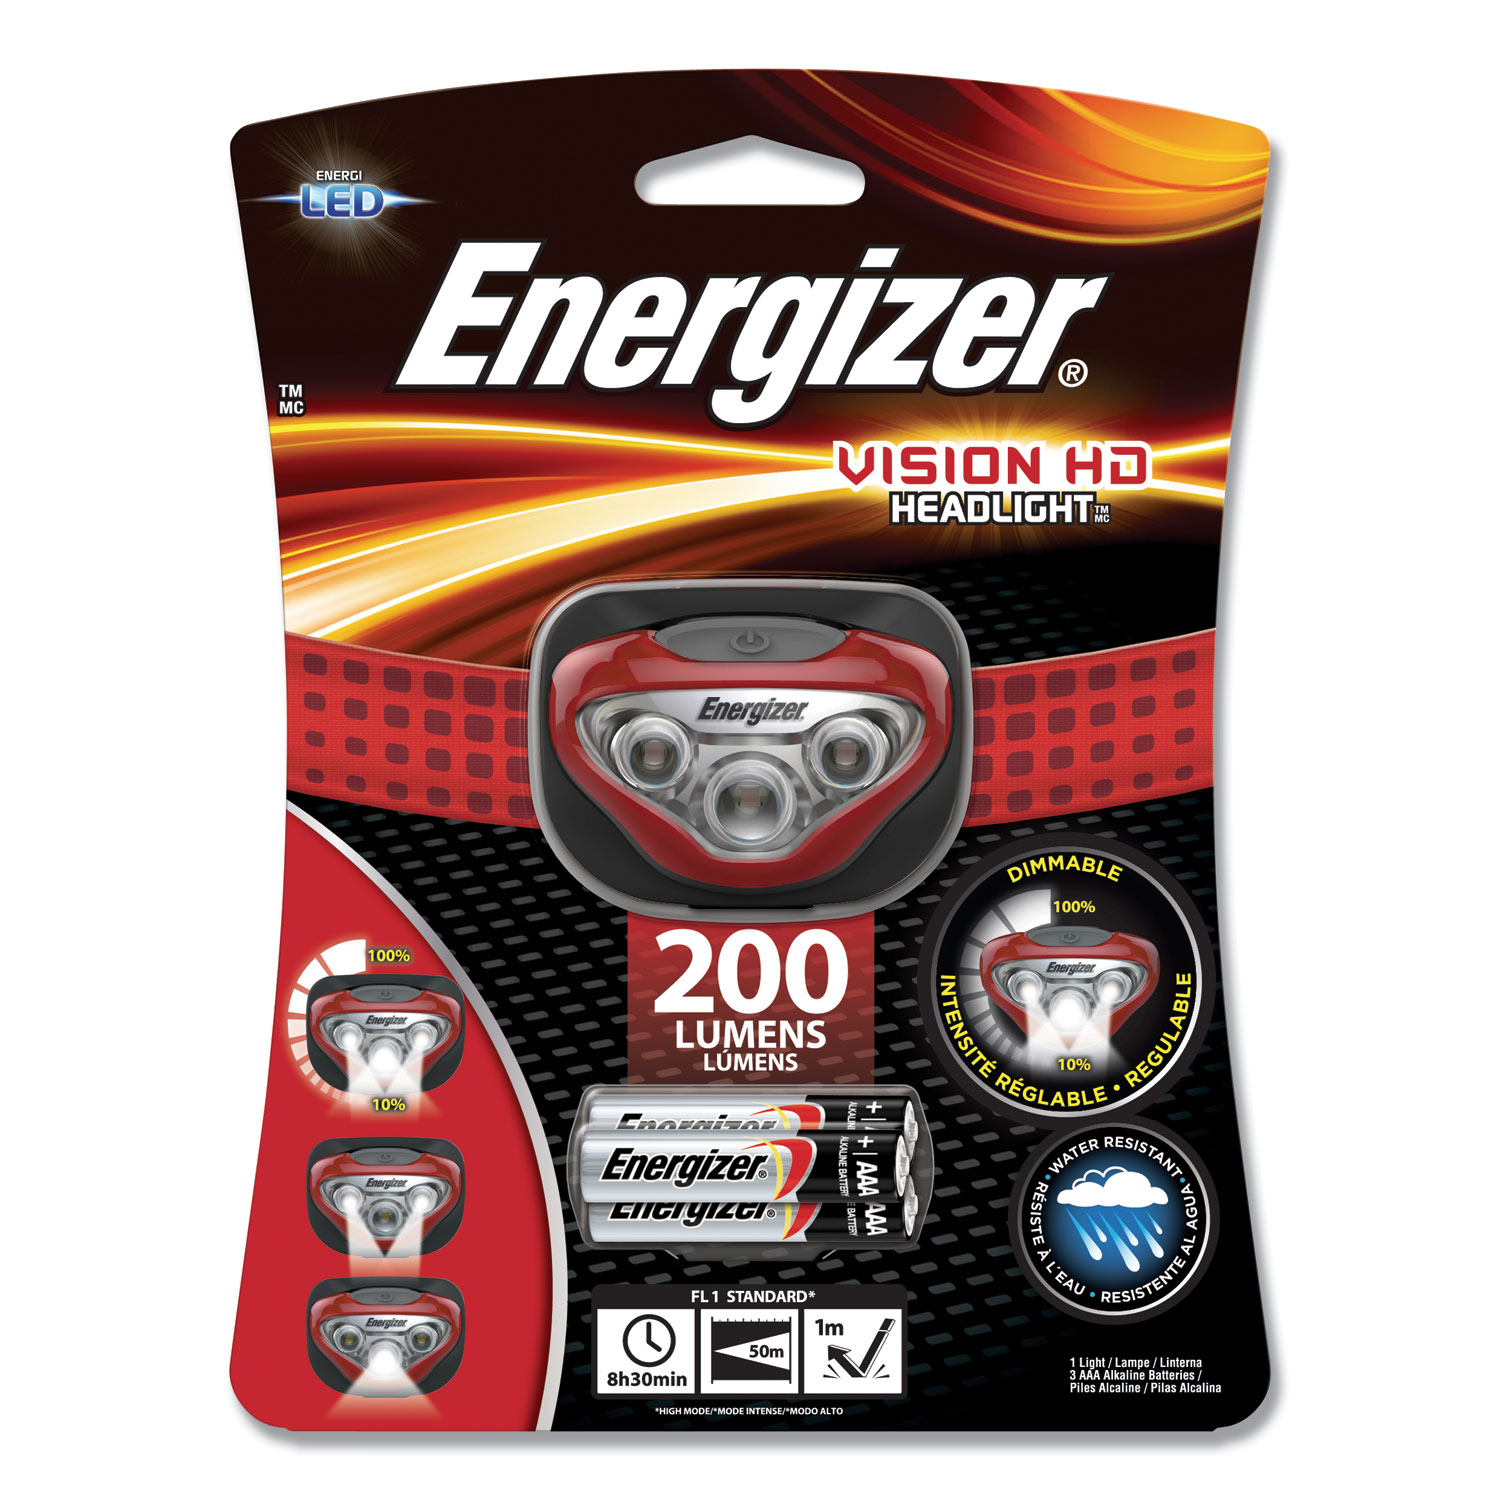 LED Headlight, 3 AAA Batteries (Included), Red